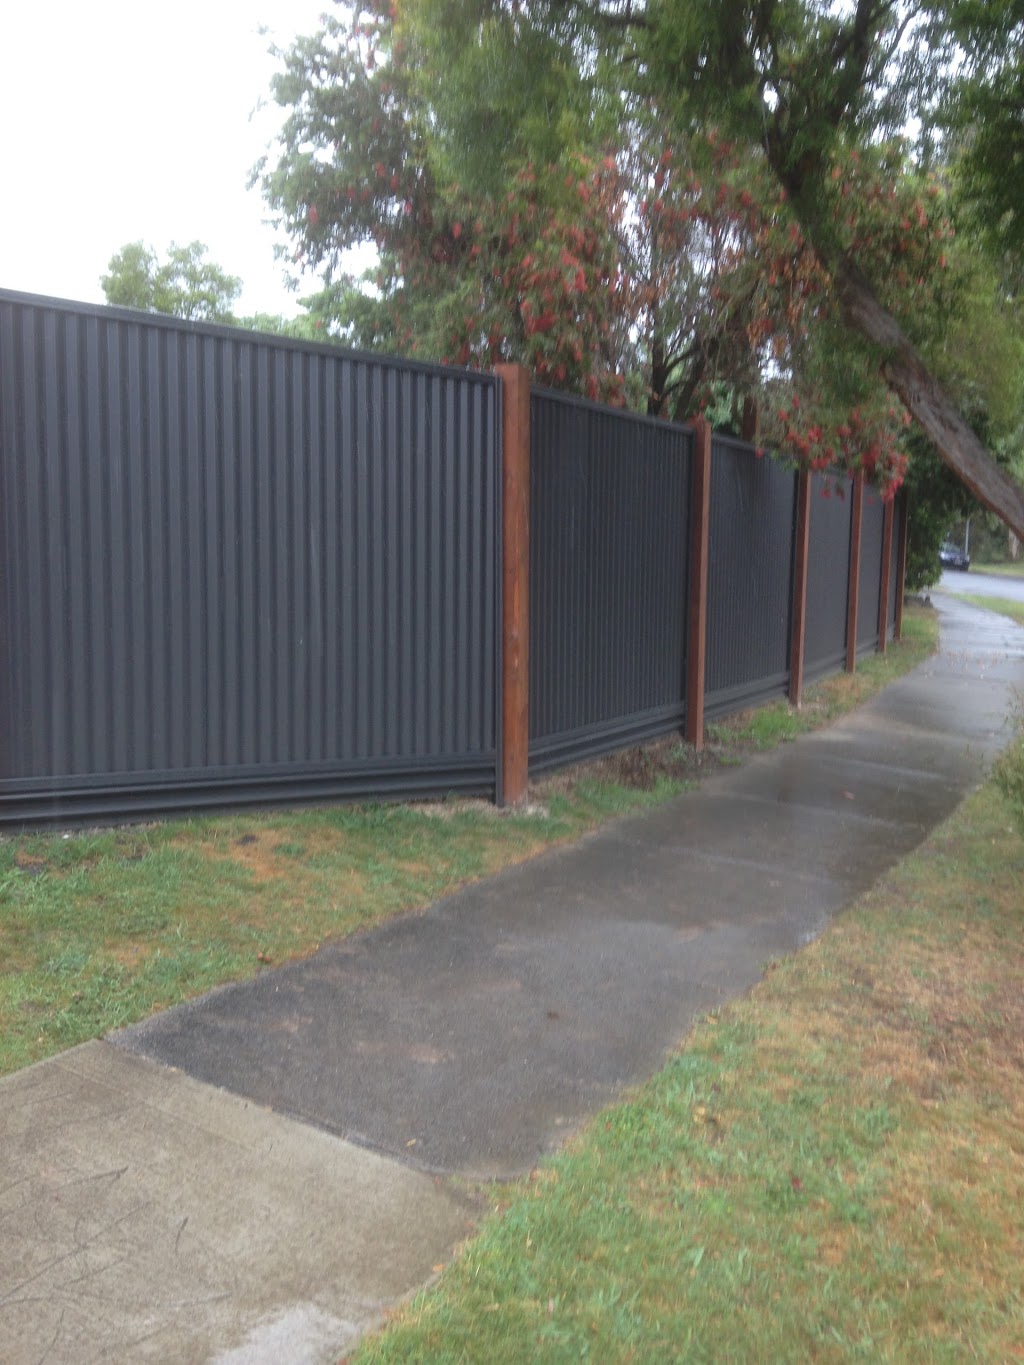 New Style Fencing | store | 28 Laser Dr, Rowville VIC 3178, Australia | 0397532430 OR +61 3 9753 2430